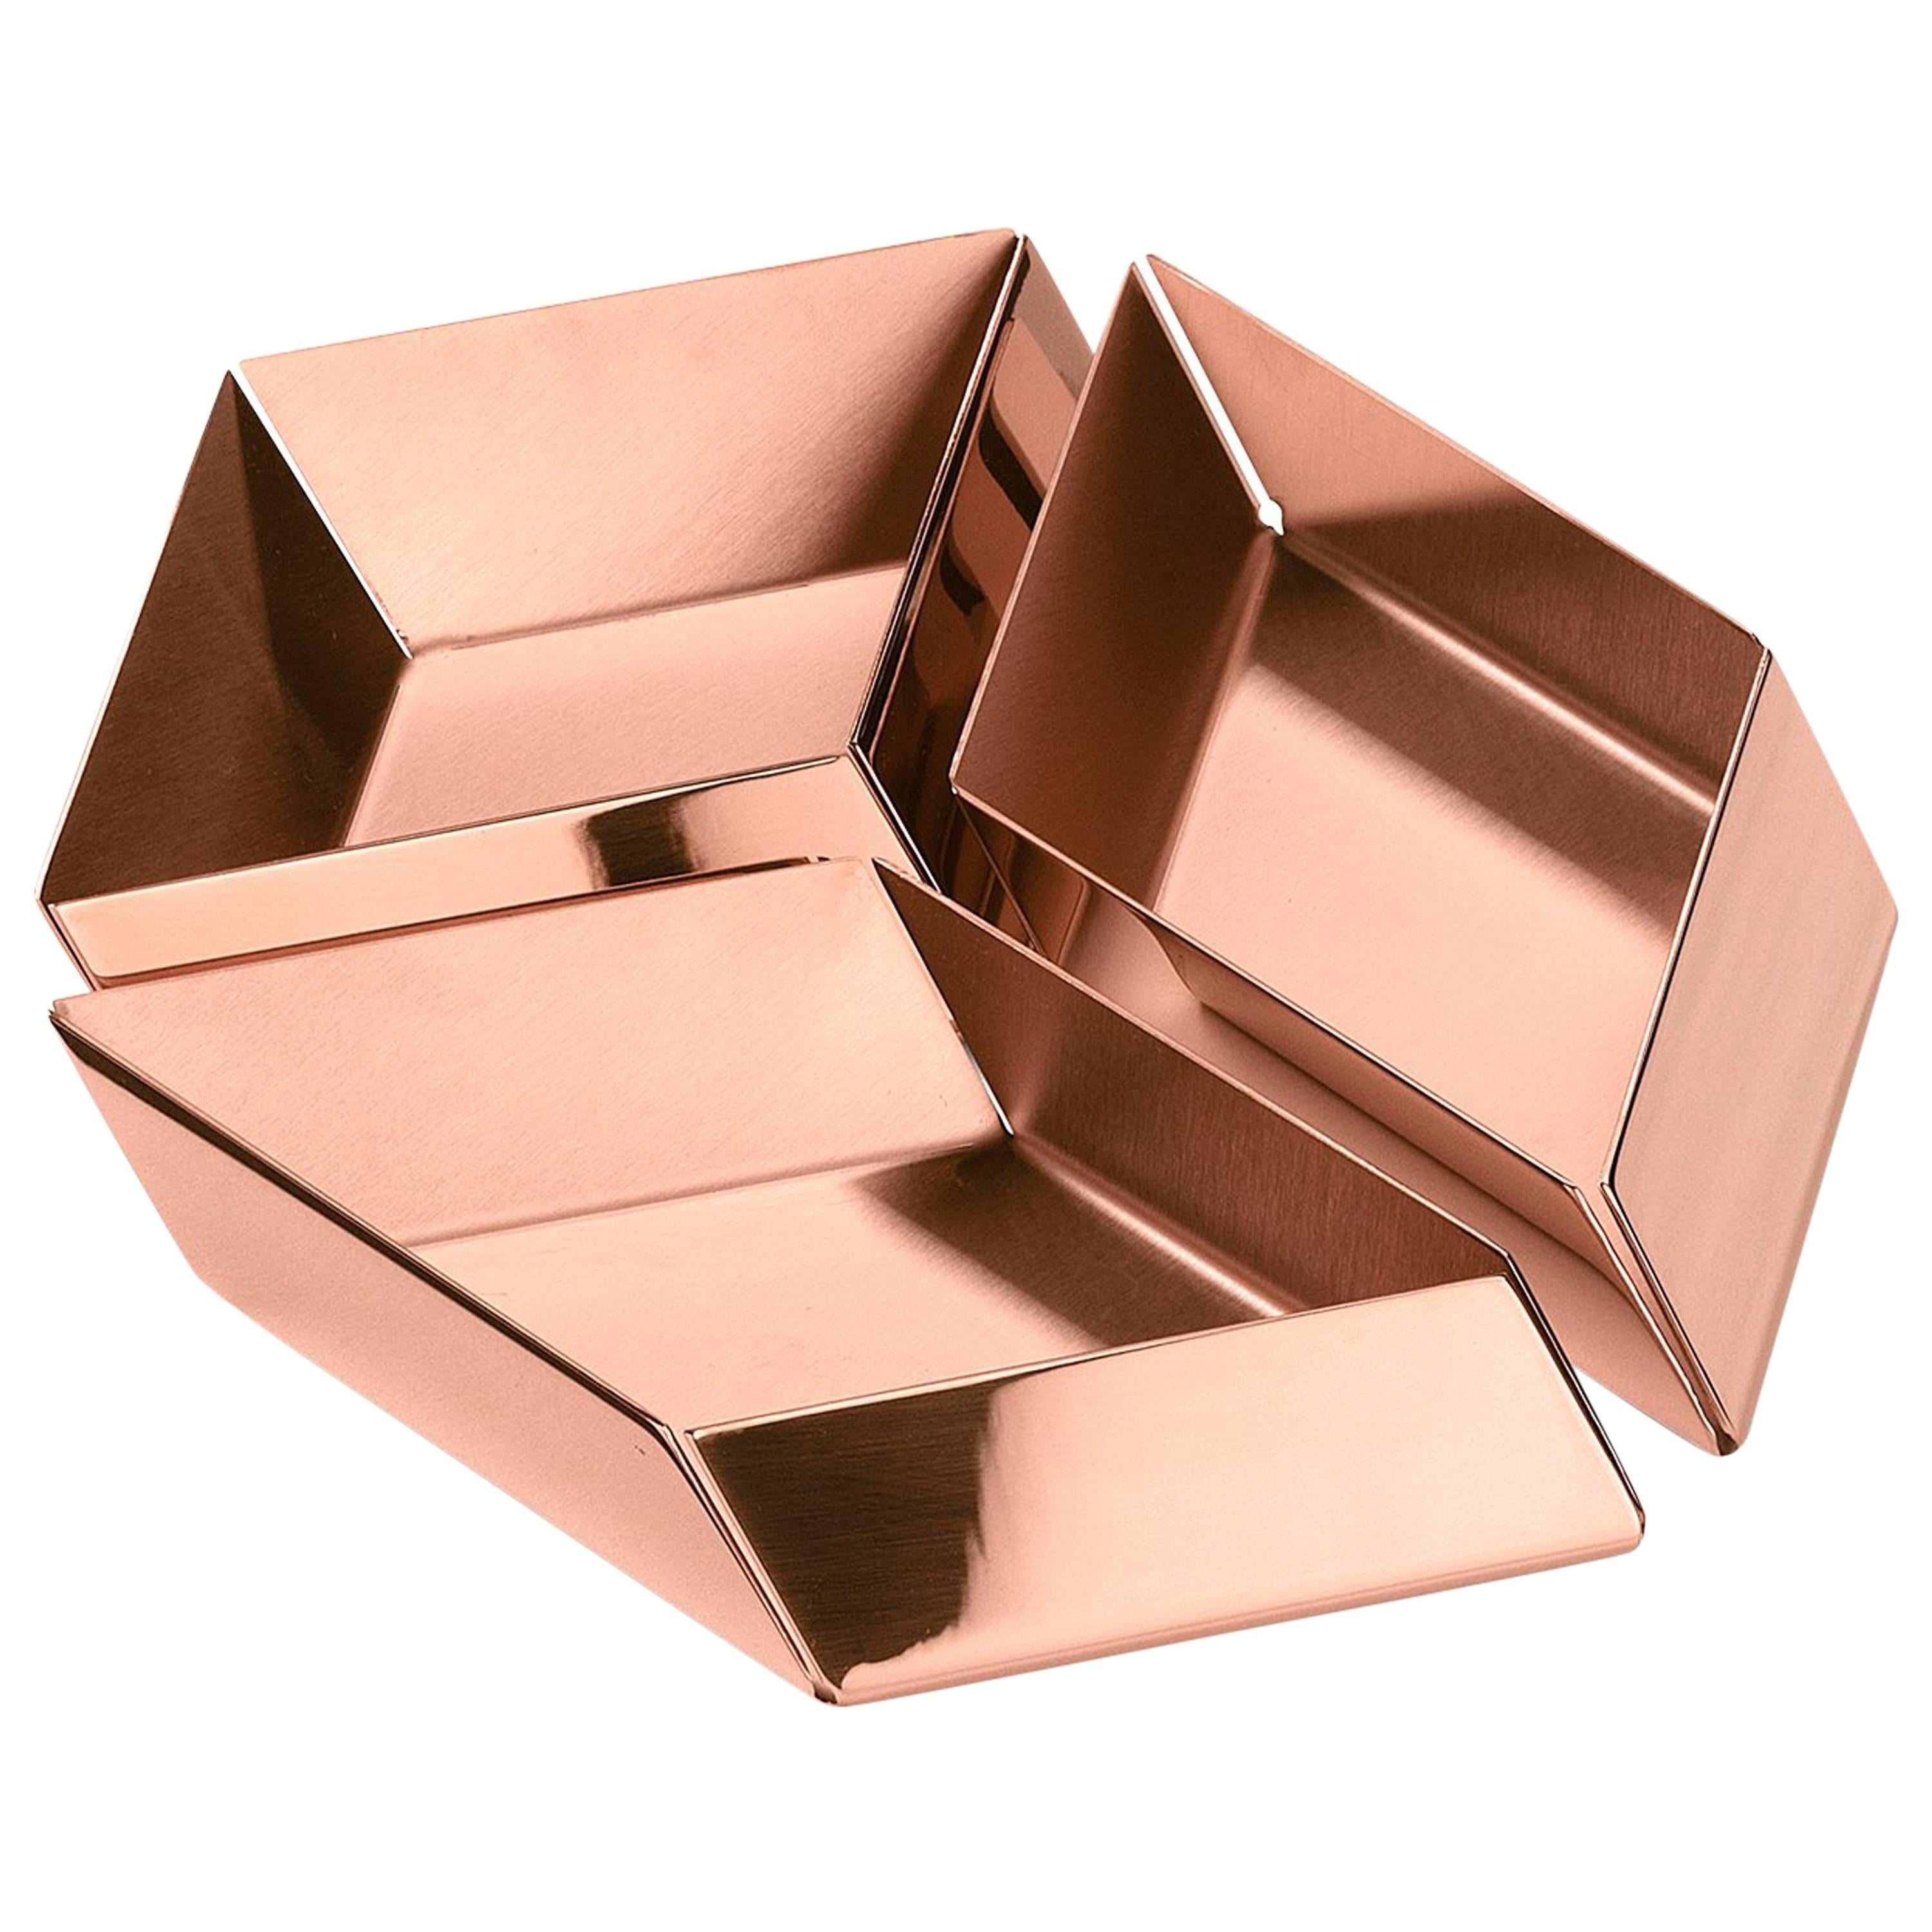 Ghidini 1961 Axonometry Set 1 Small Cube Tray in Rose Gold Finish